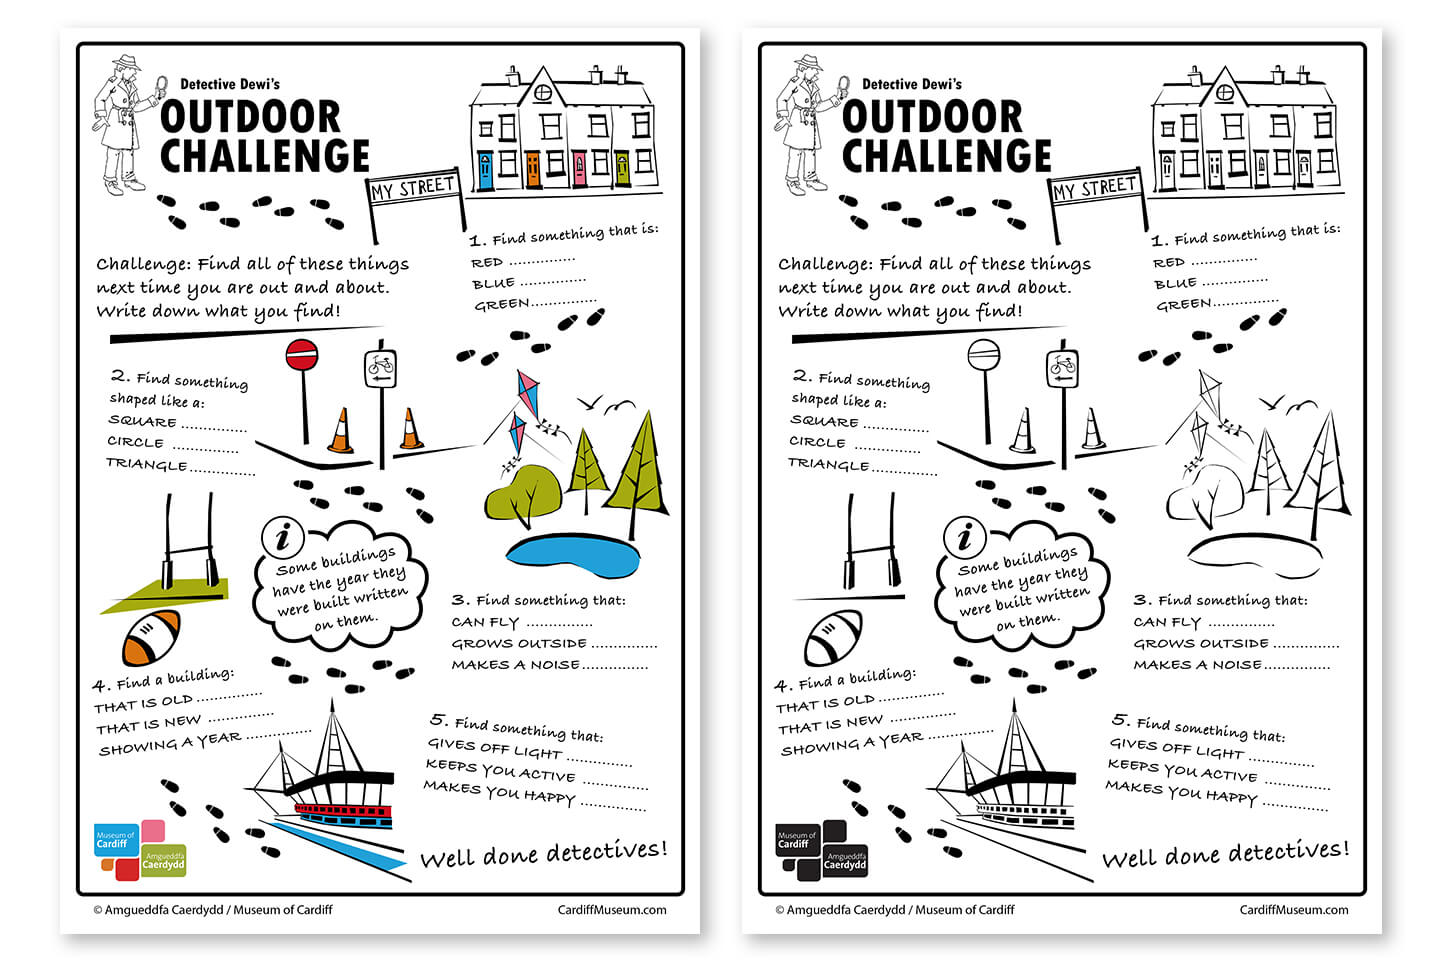 Images of Activity sheets. Colour version and black and white version.